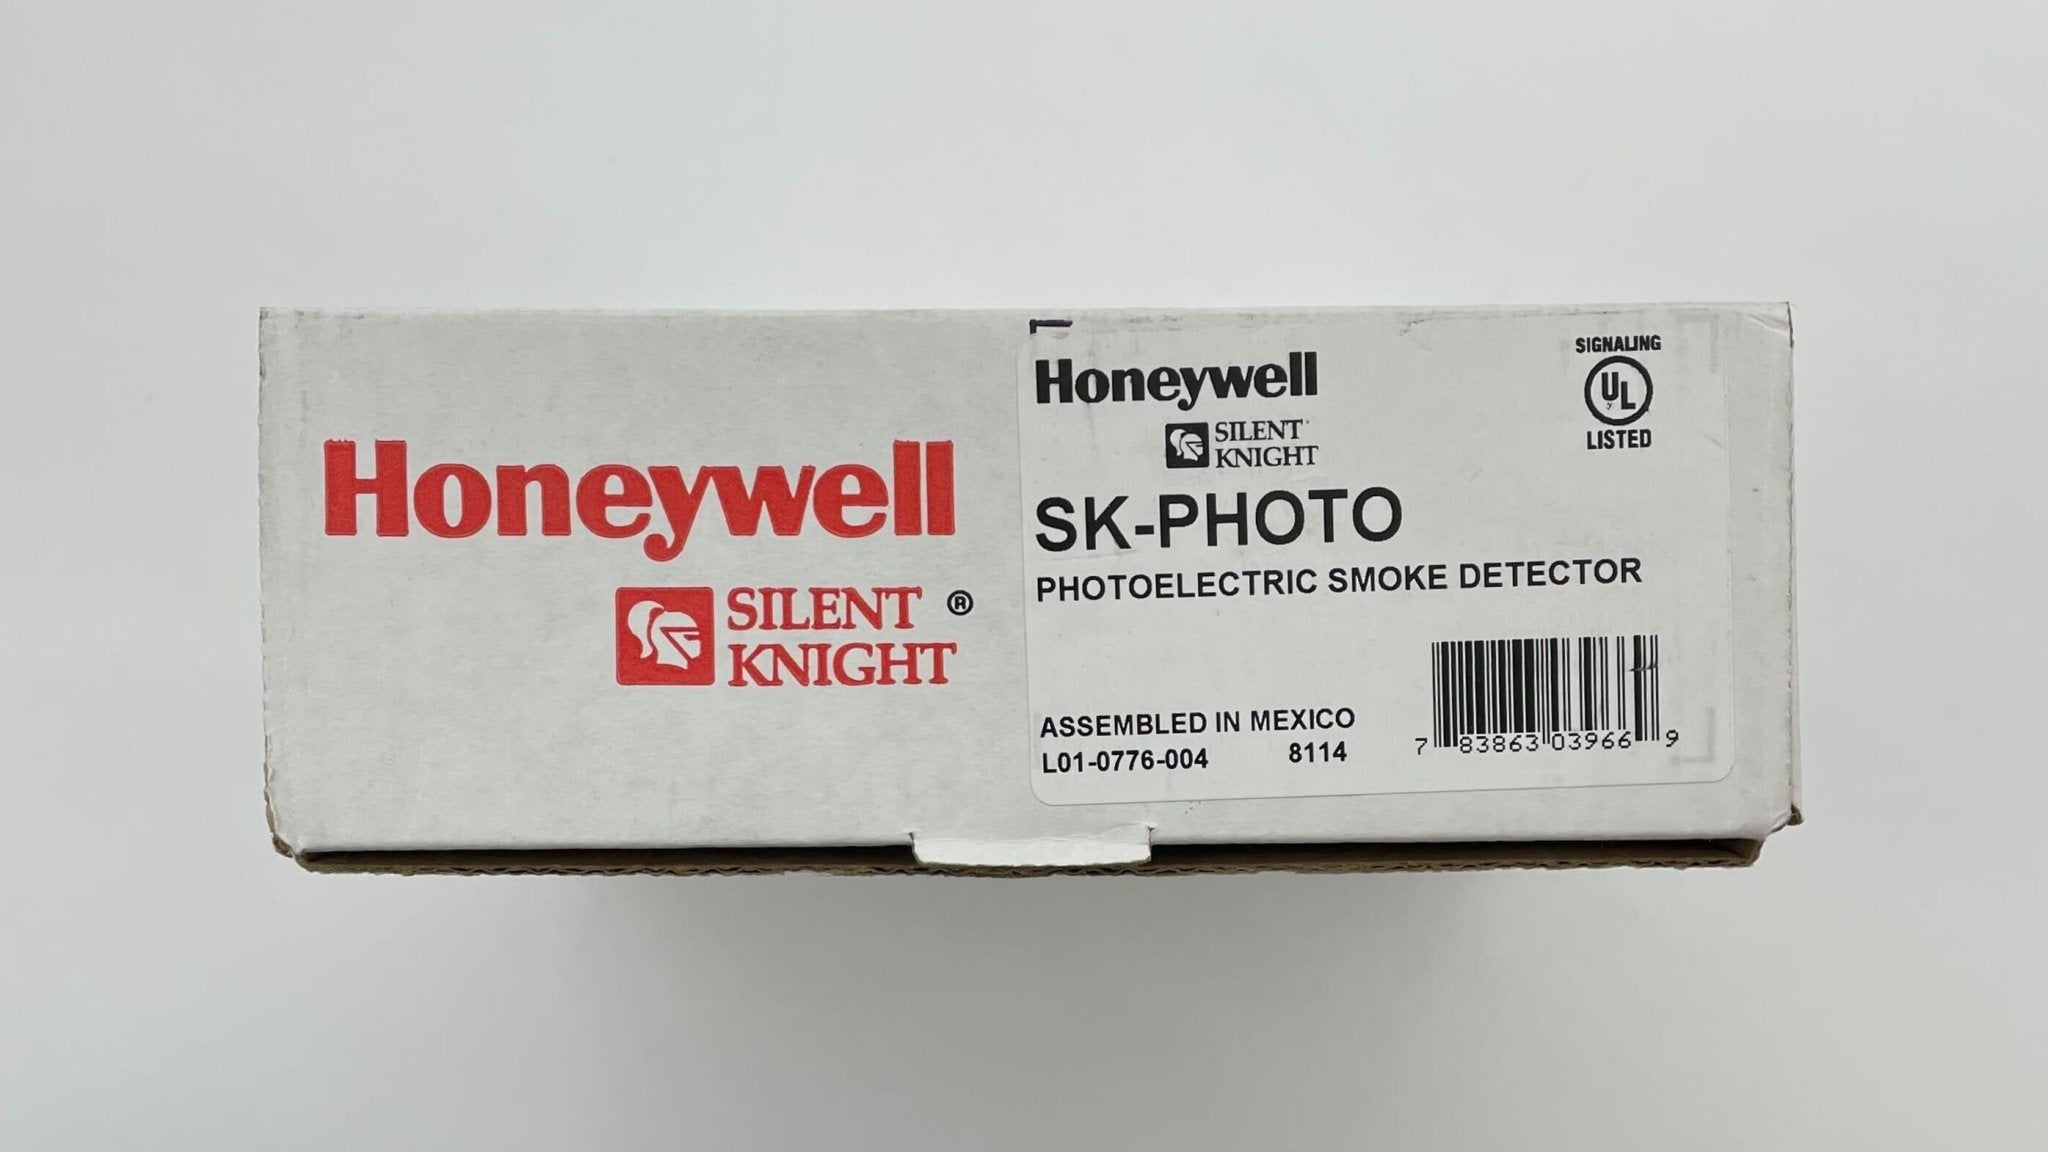 Silent Knight SK-PHOTO - The Fire Alarm Supplier